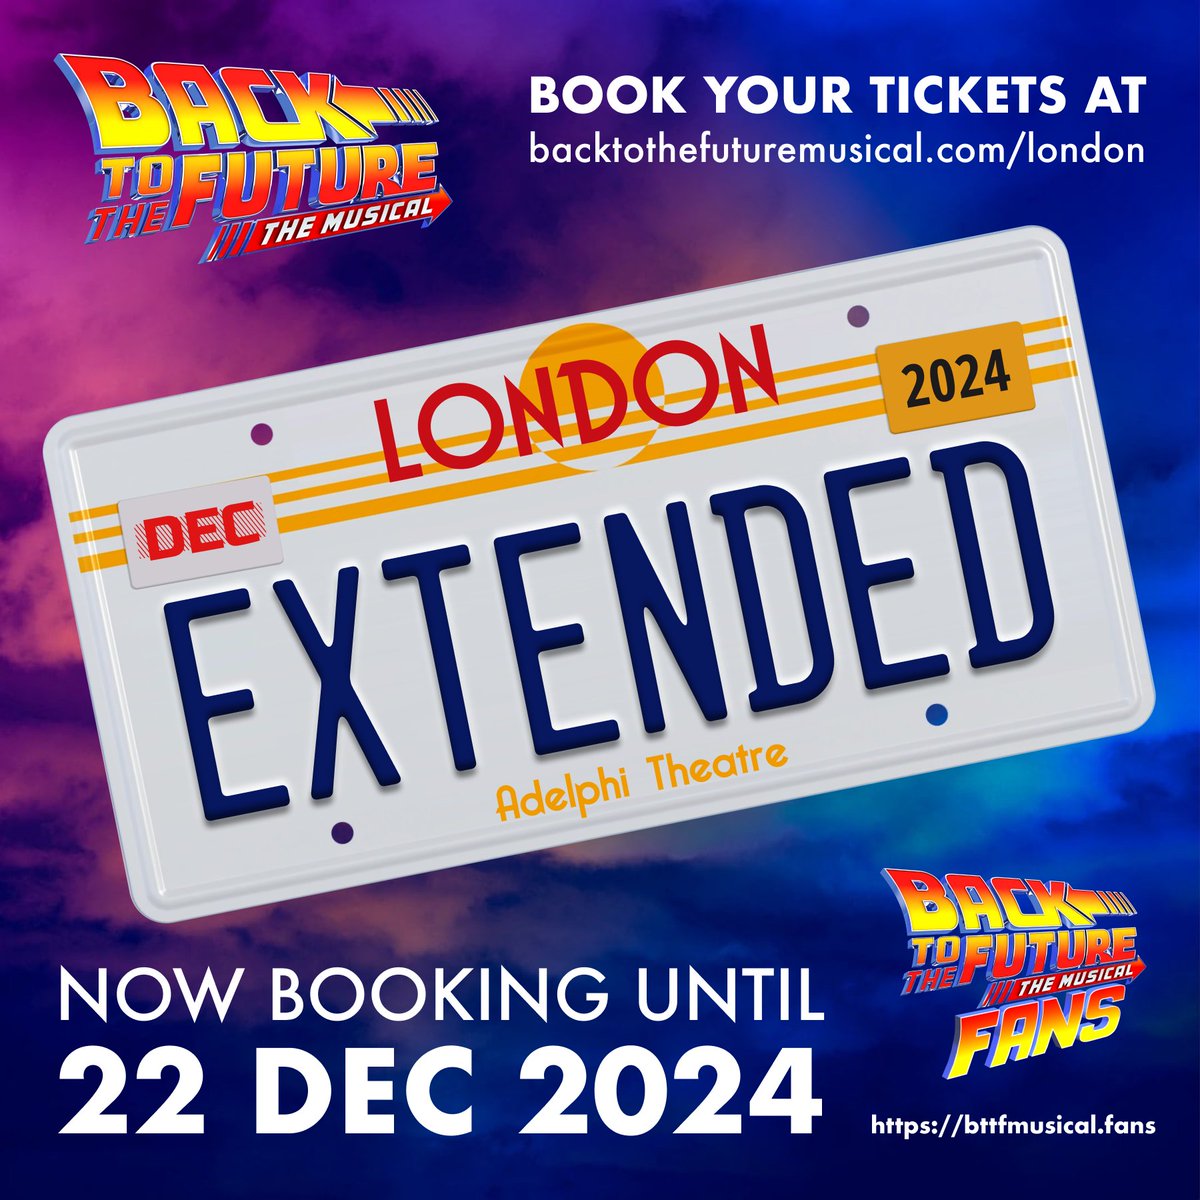 IN TERMS OF THE VERNACULAR, IT’S SPECTACULAR… ⚡️ @BTTFmusical at the Adelphi Theatre is now booking until 22nd DECEMBER 2024 💙 🎟 Book your tickets at backtothefuturemusical.com/london #bttfmusical #backtothefuturemusical #backtothefuturethemusical #bttf #backtothefuture #westend